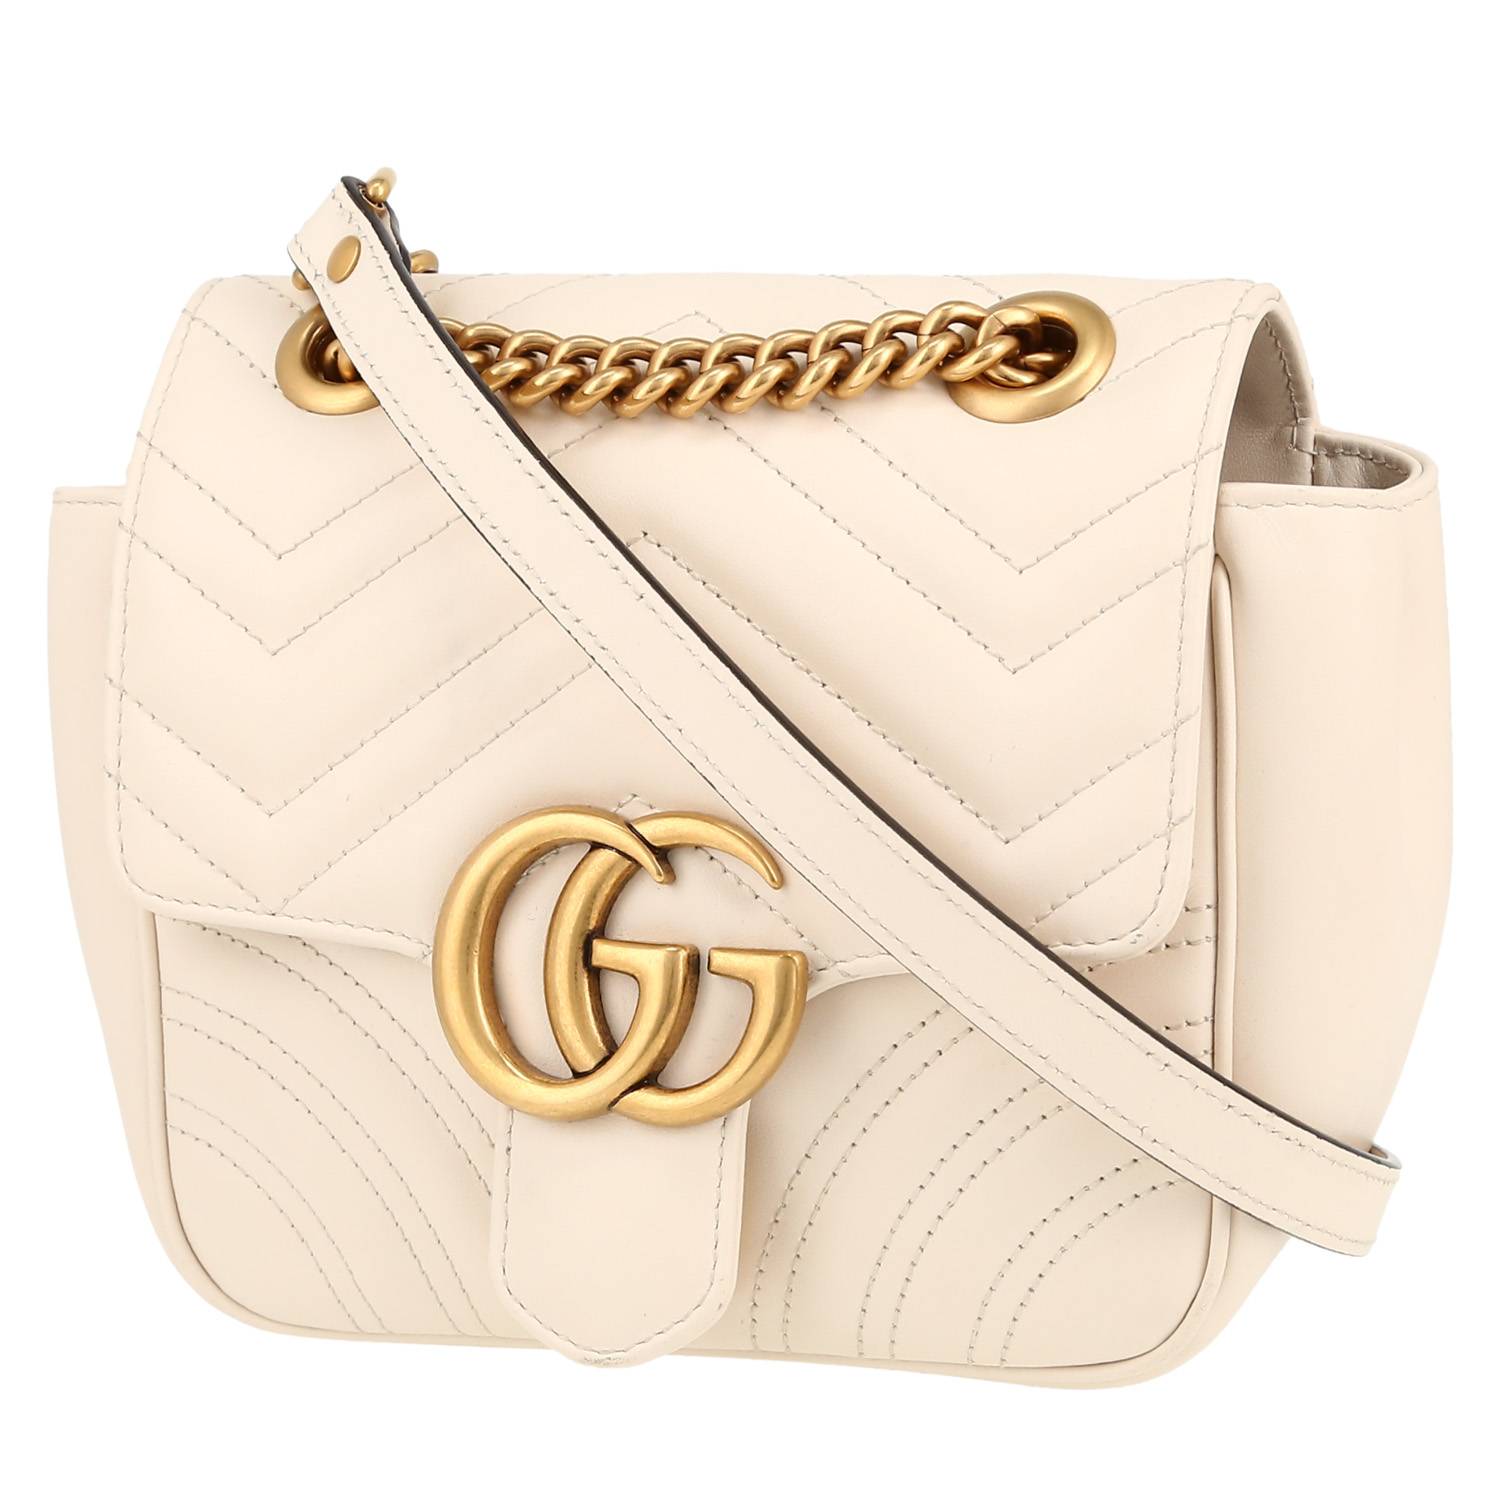 GG Marmont Small Model Shoulder Bag In Quilted Leather